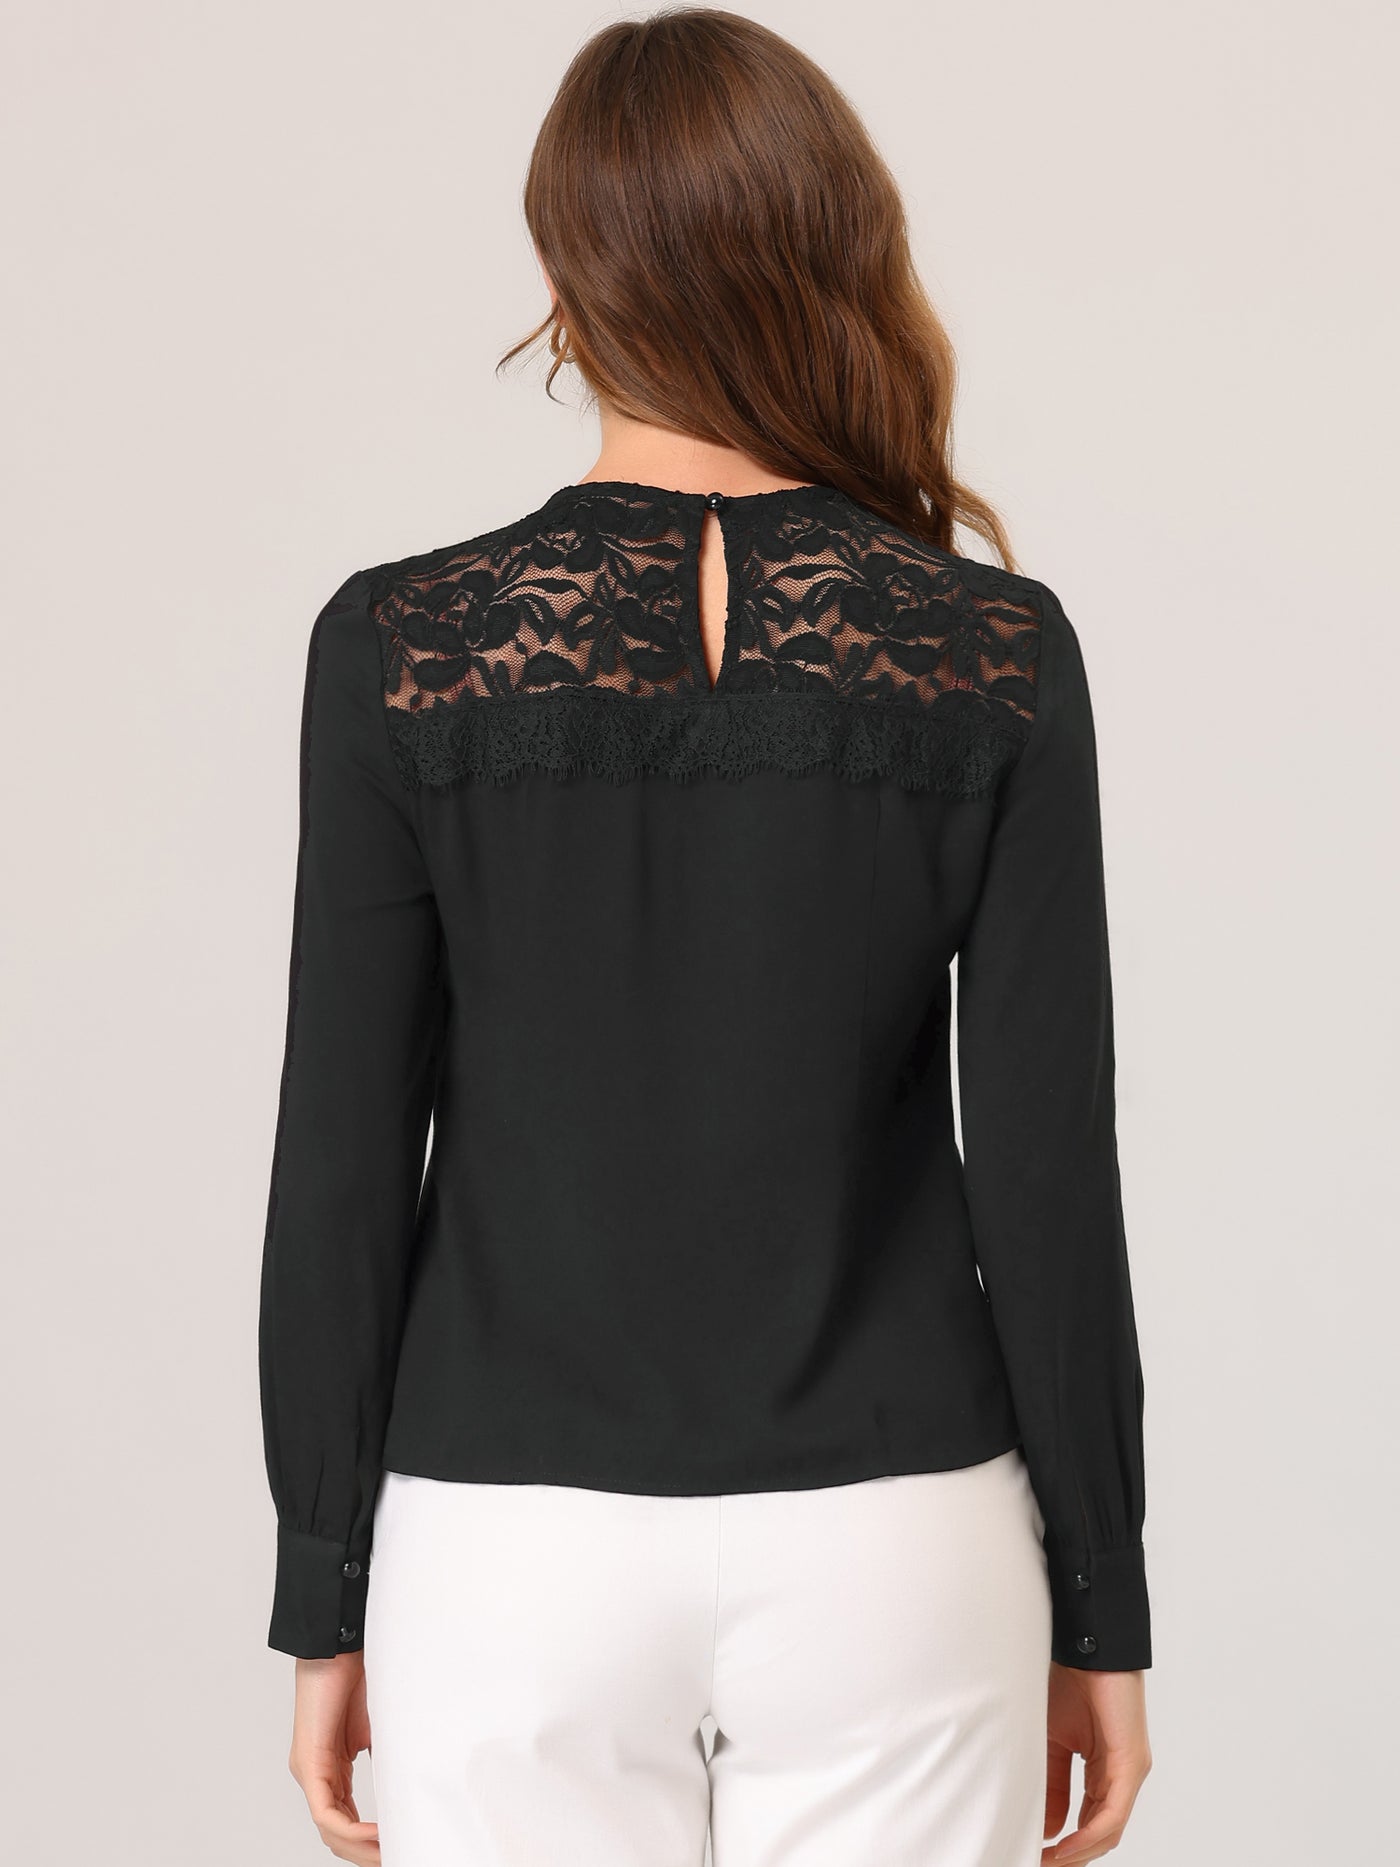 Allegra K Lace Panel Top Round Neck Long Sleeve Solid Color Tops